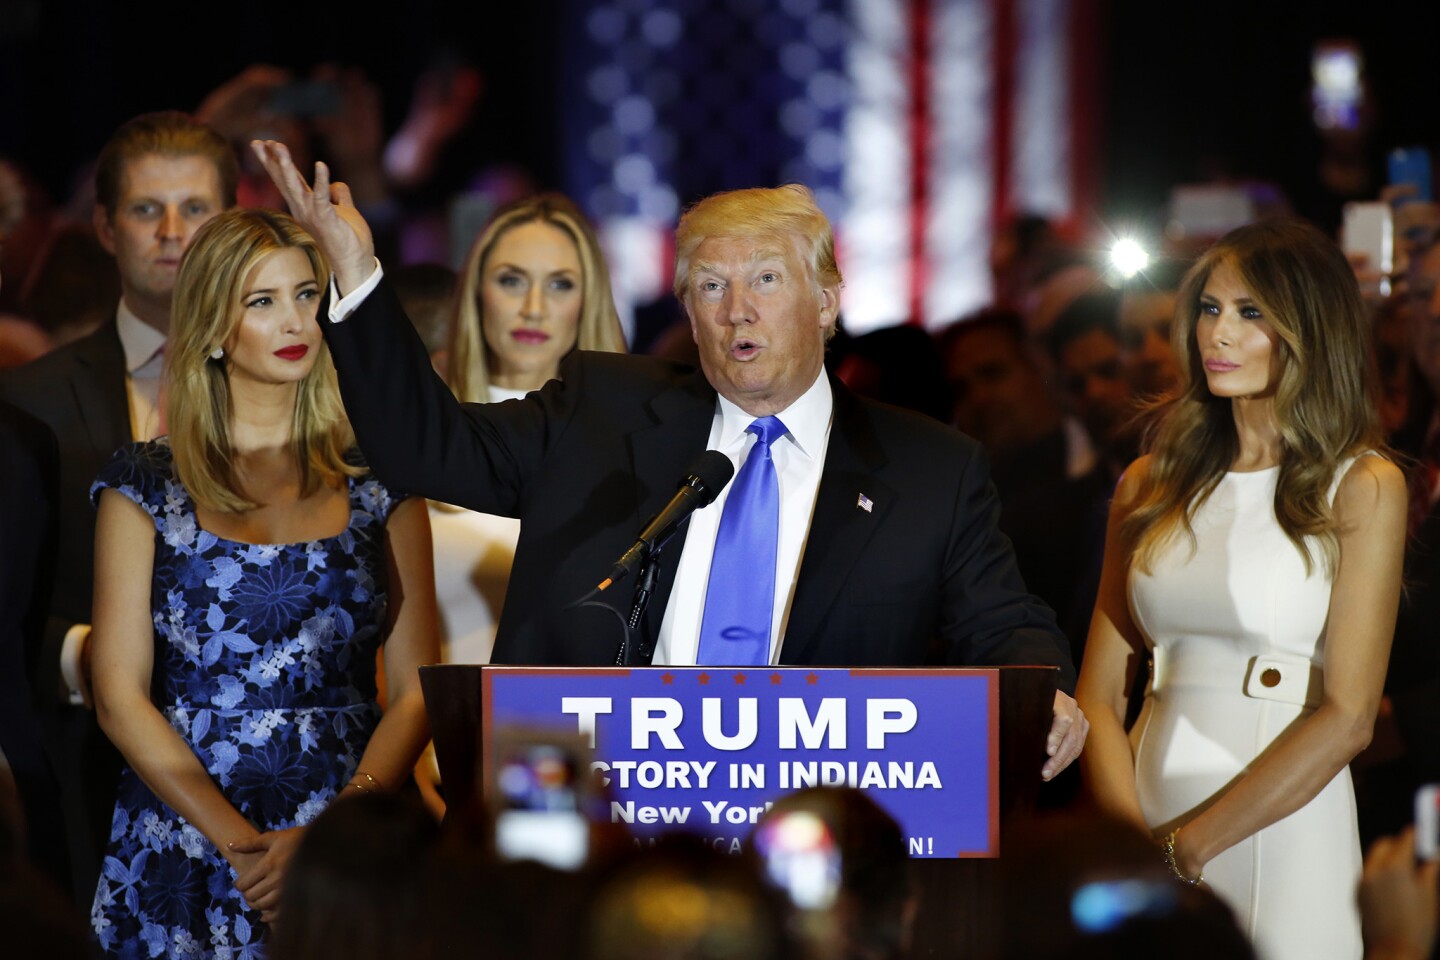 Donald Trump addresses the media and a few supporters in New York after winning the Indiana primary.